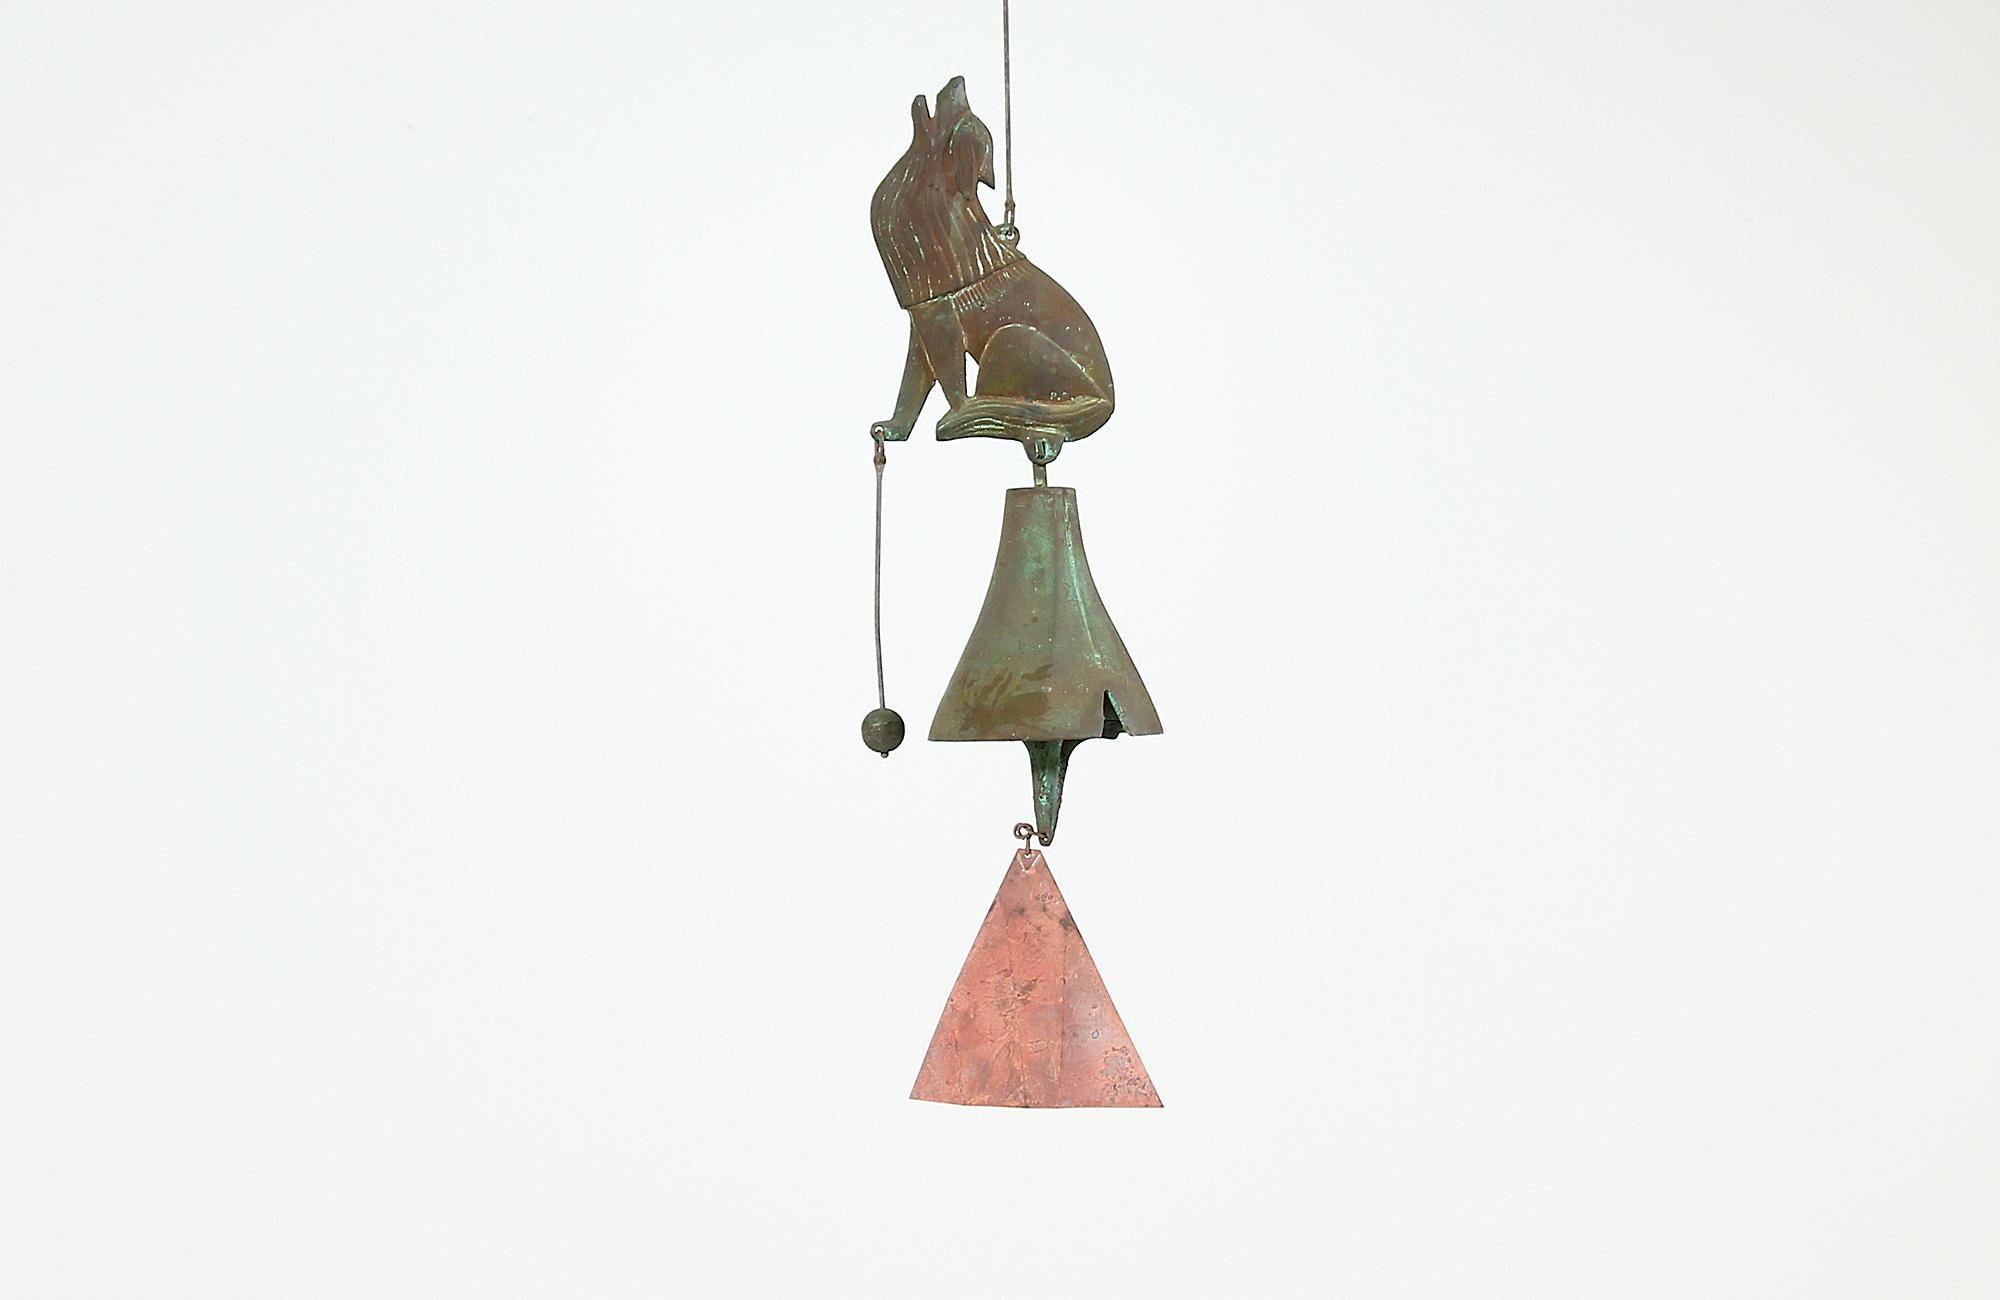 Extraordinary wind chime designed by Paolo Soleri for Arcosanti in the United States, circa 1960s. Featuring a beautiful handcrafted wind chime casted in bronze and copper. The bronze wolf and bell show a gorgeous verdigris patina, while the